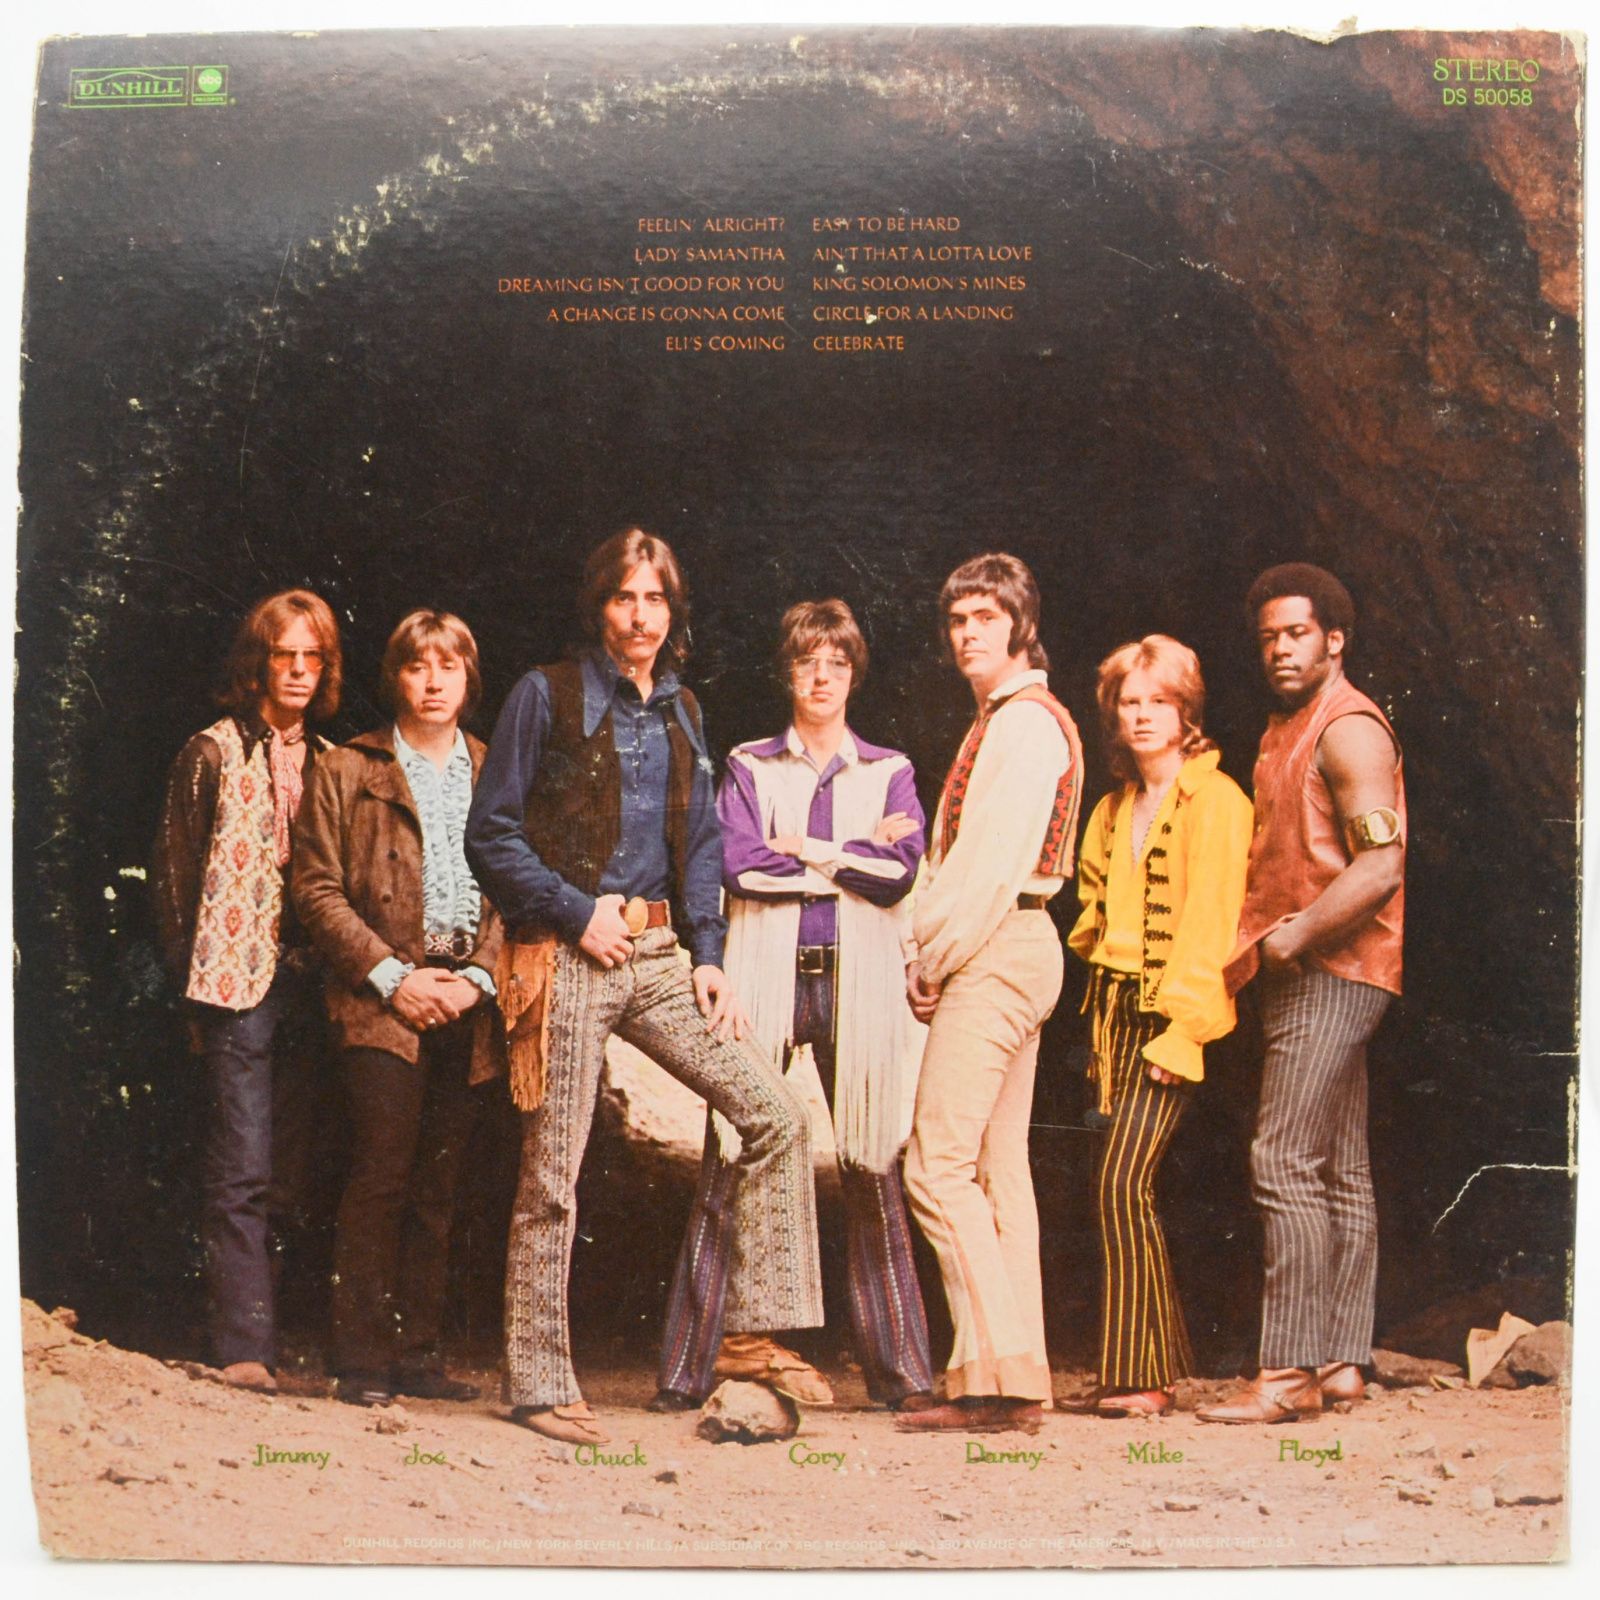 Three Dog Night — Suitable For Framing (1-st, USA), 1969